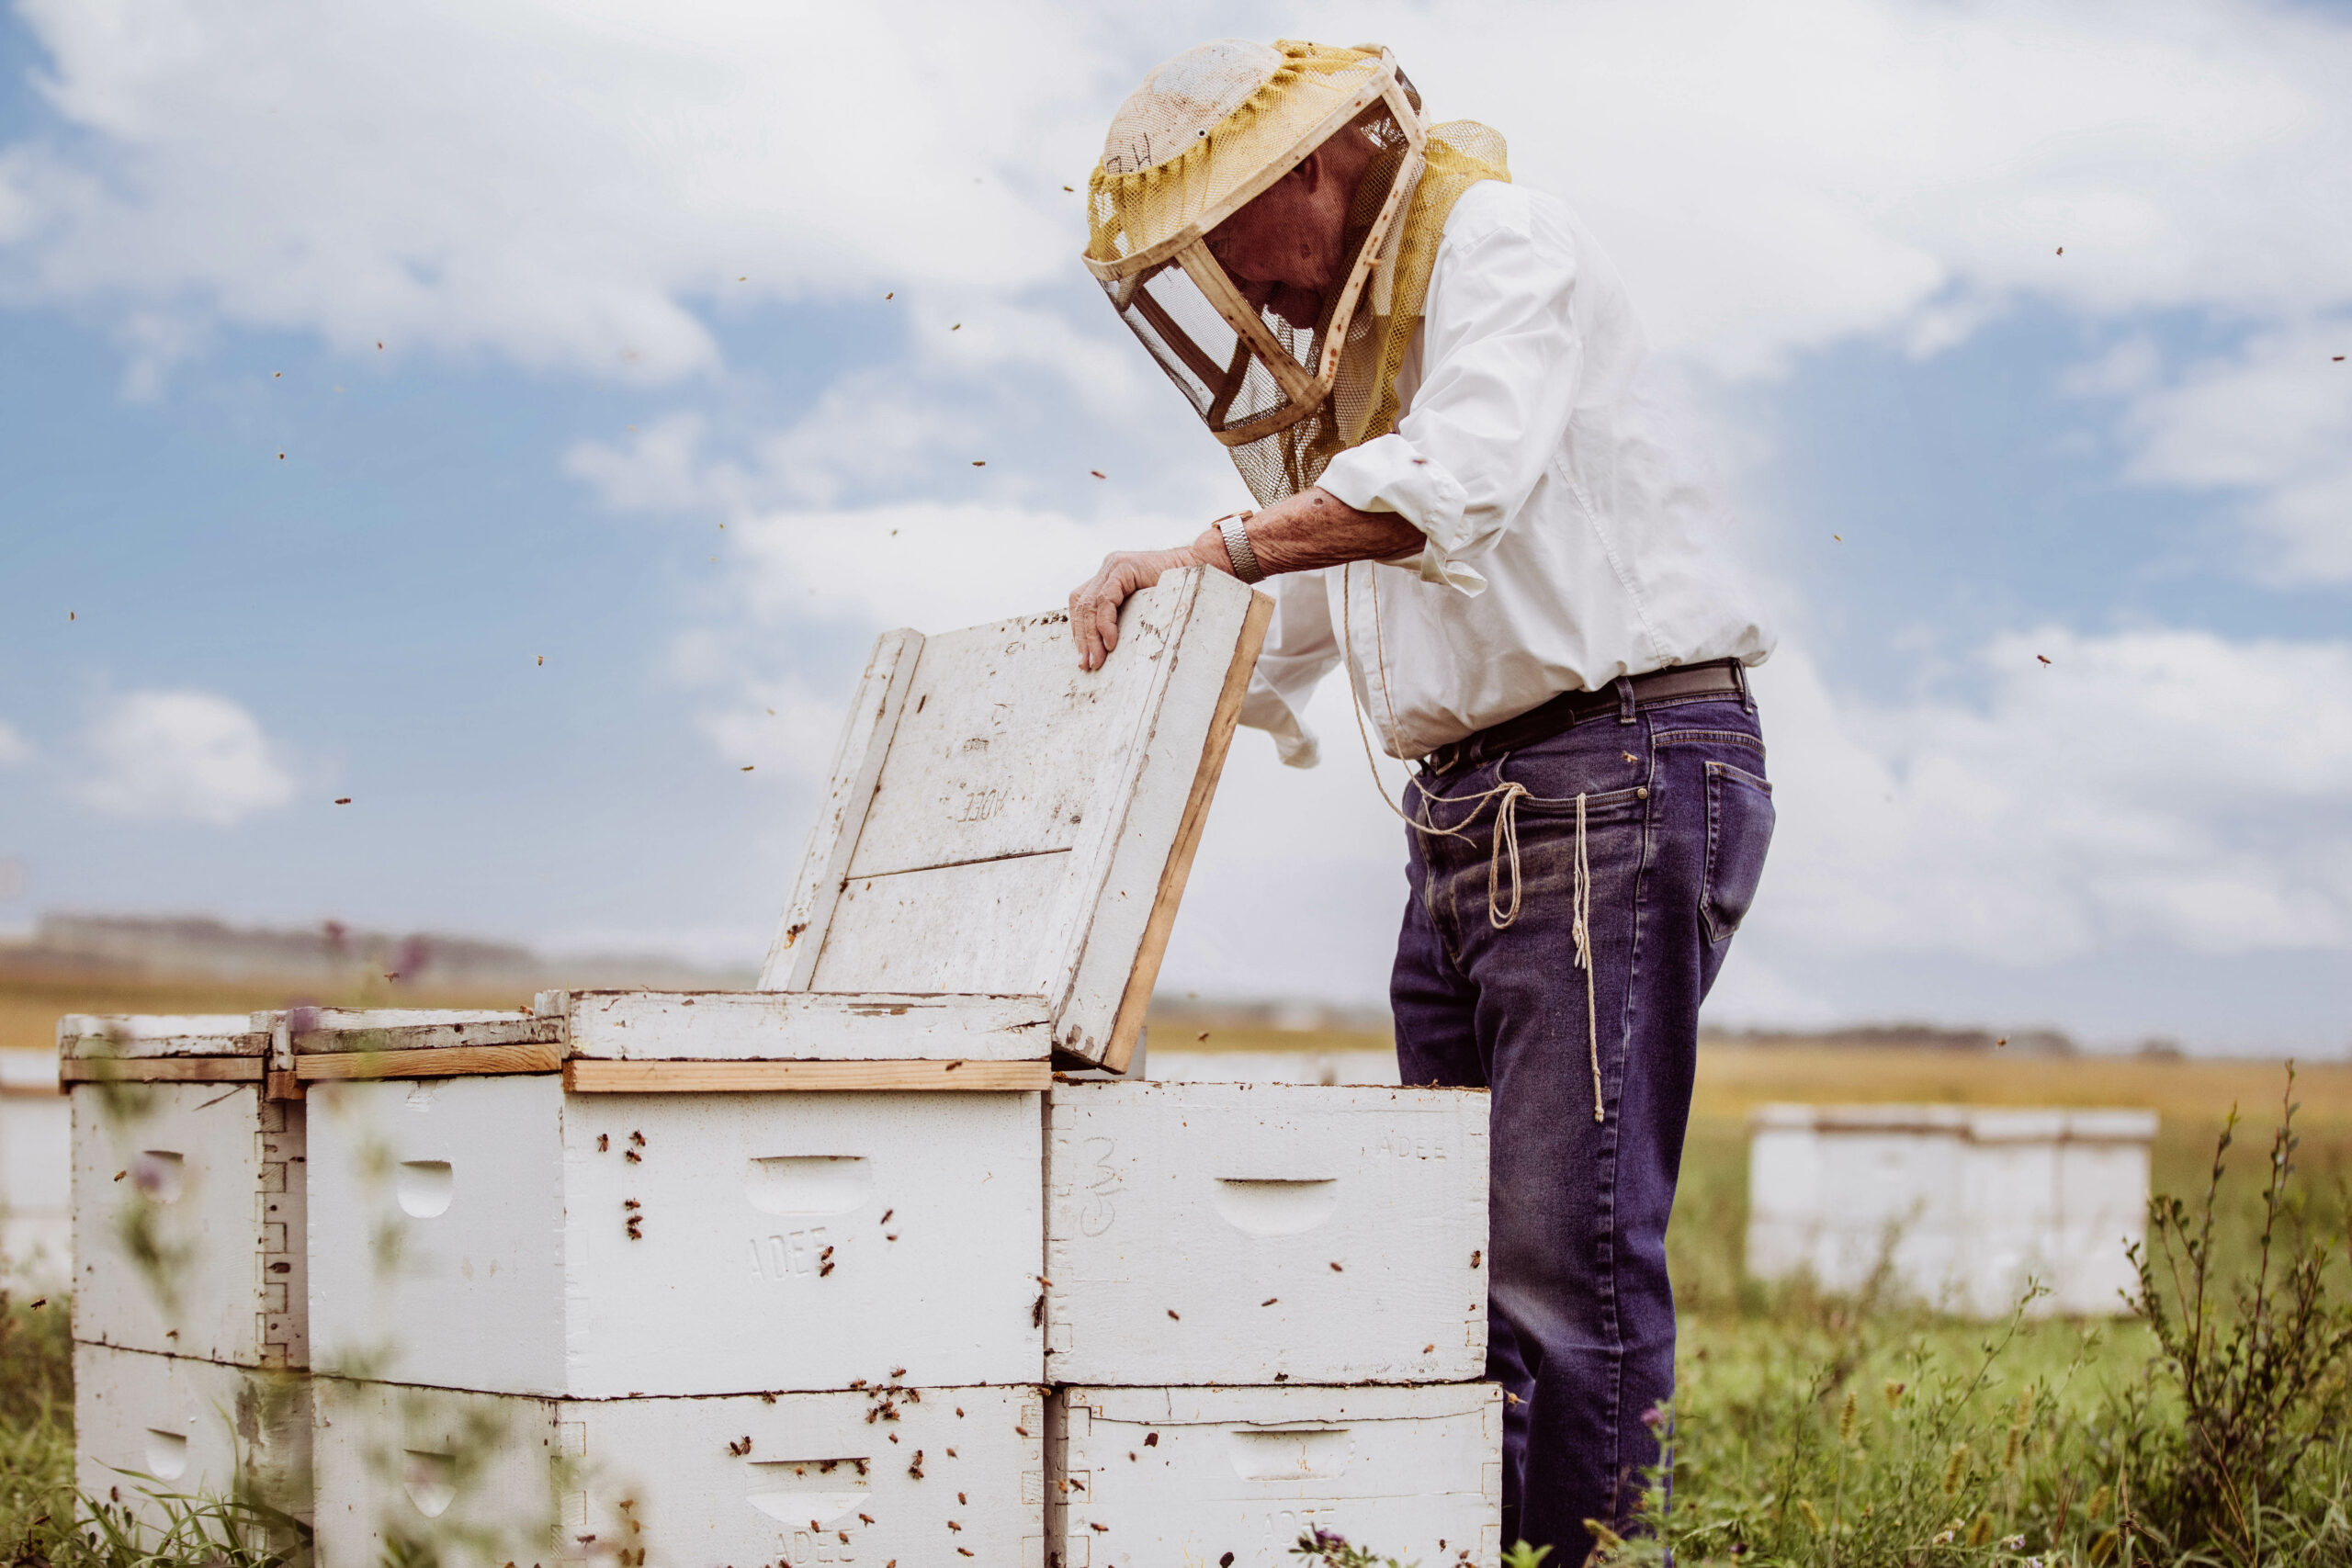 Hive to Jar, The Sweet Story of Adee Honey Farms